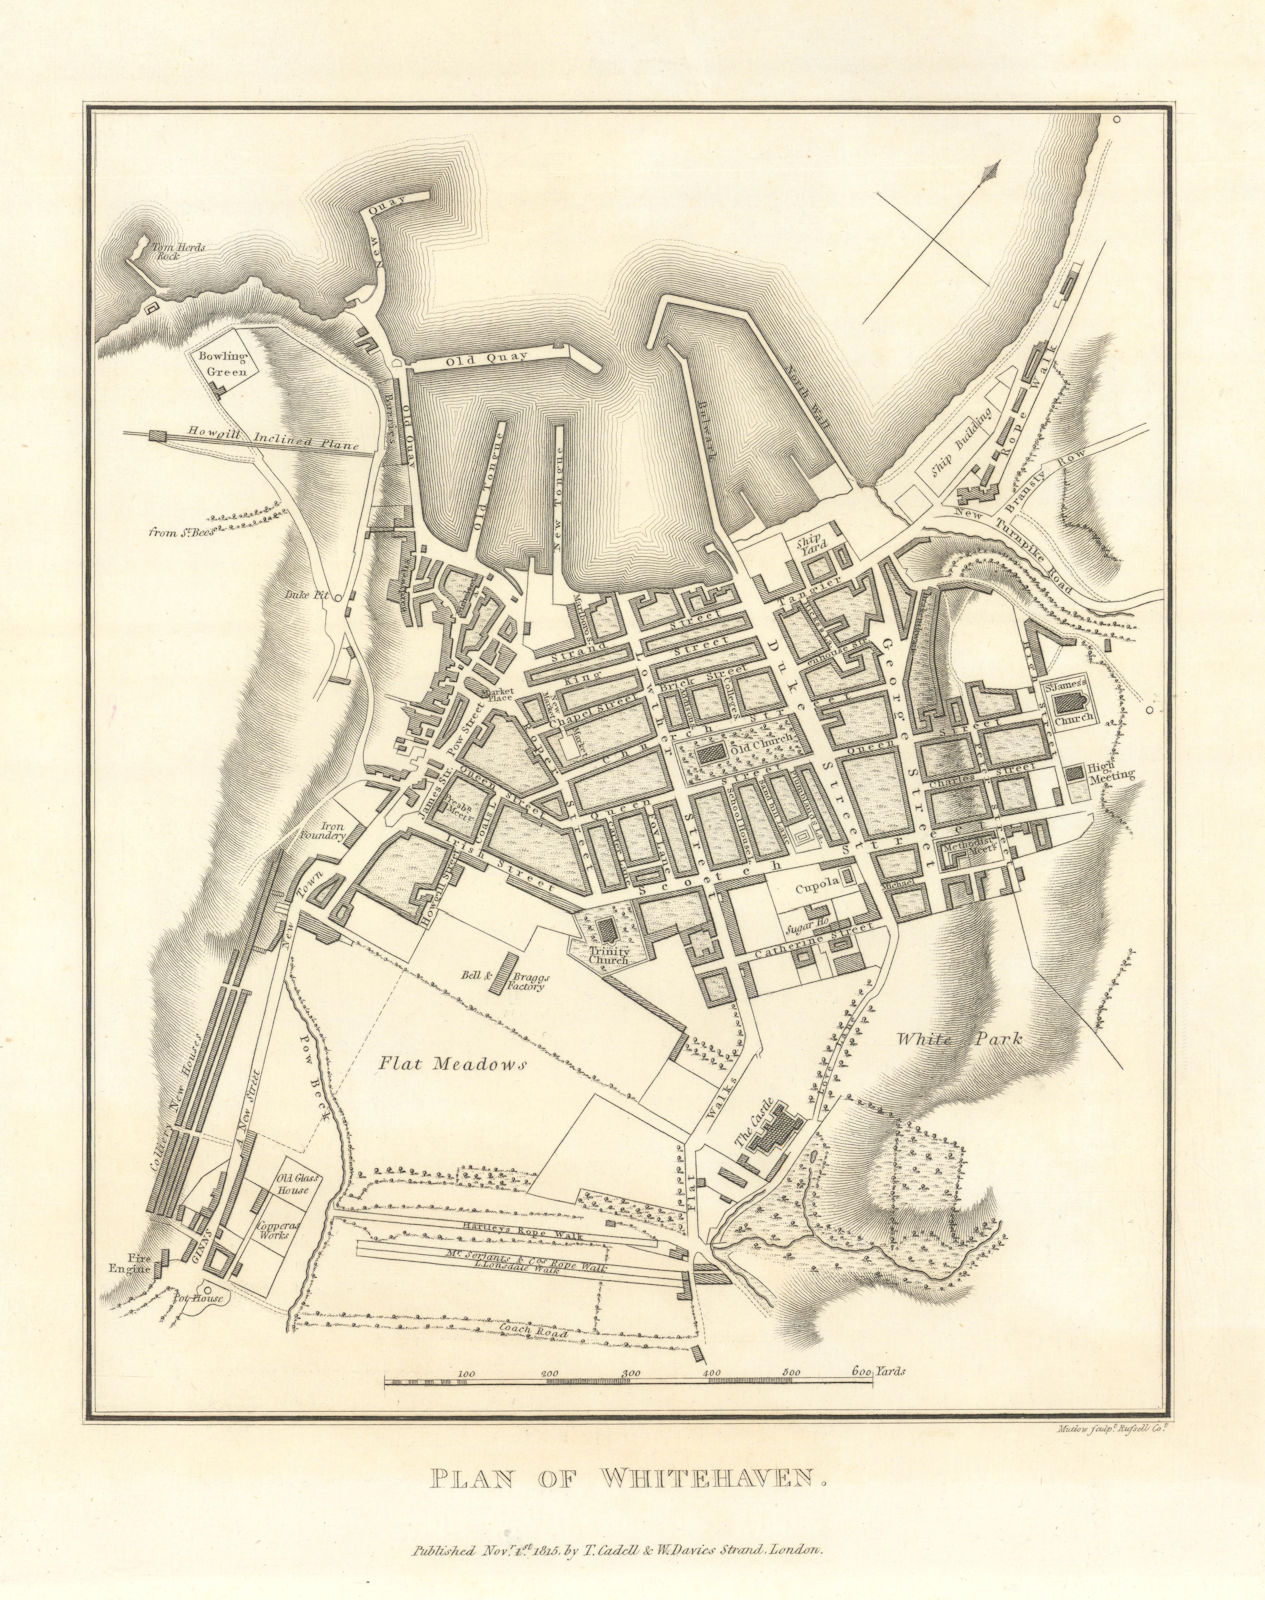 Associate Product Town 'Plan of Whitehaven' by Henry Mutlow 1816 old antique map chart